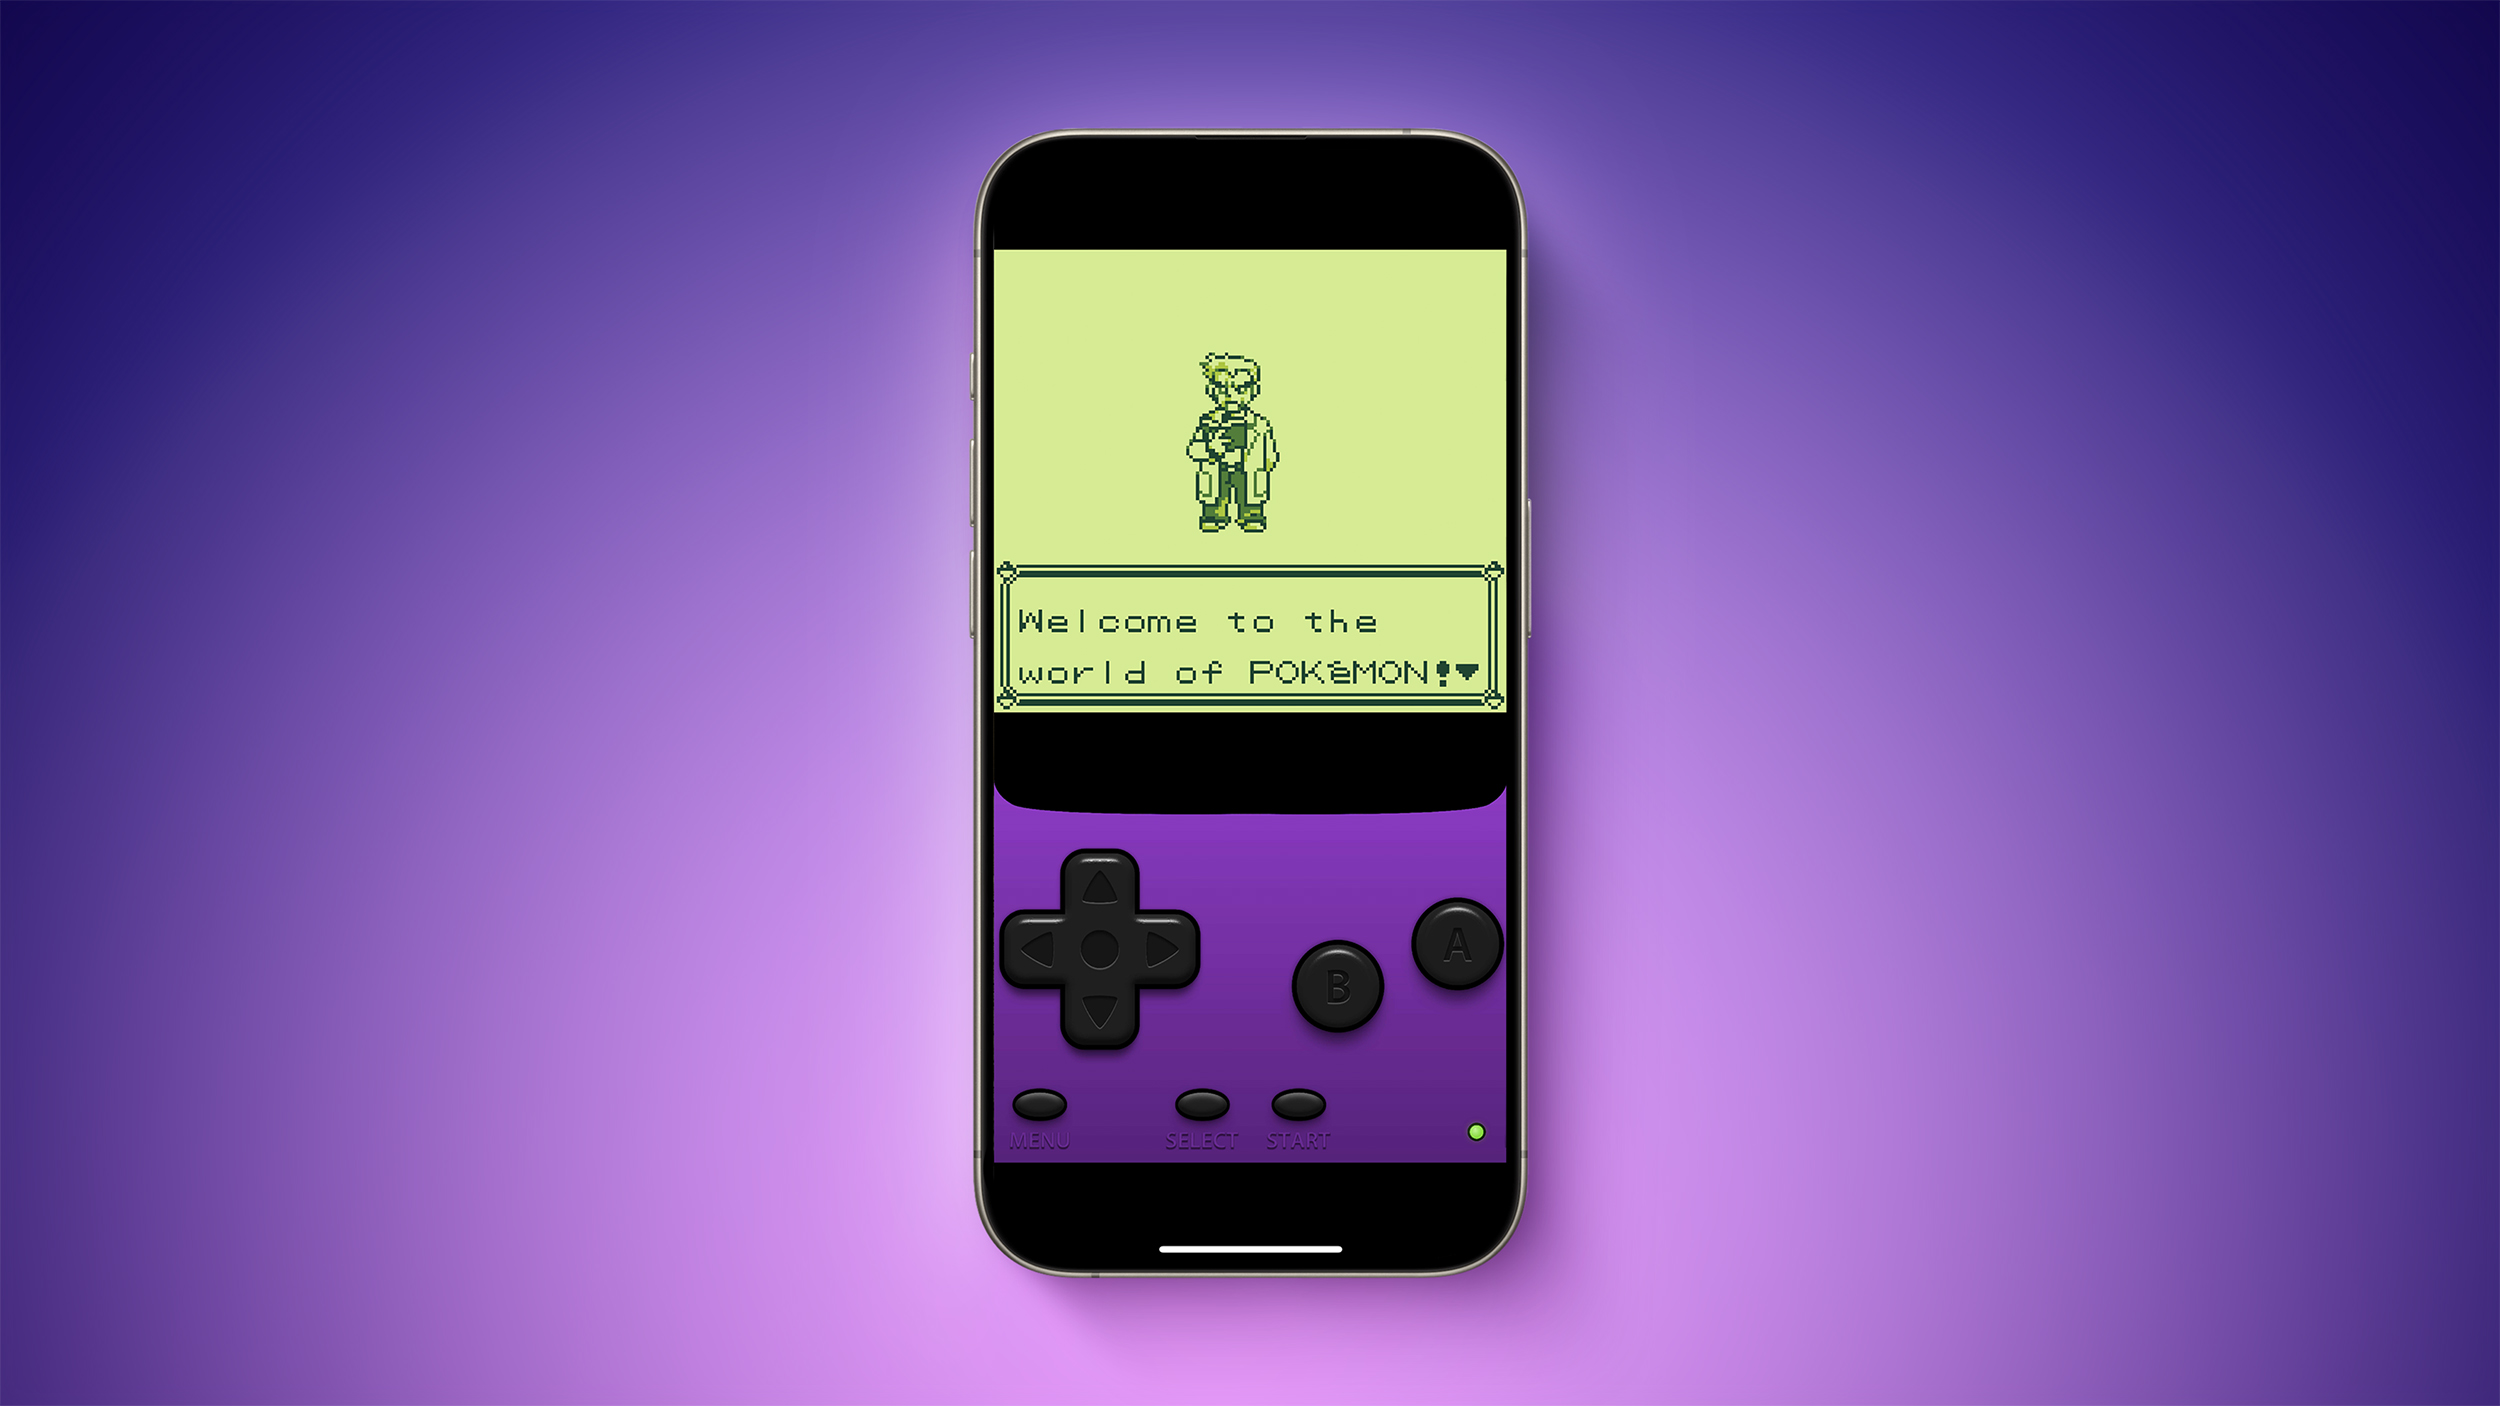 Game Boy Emulator for iPhone Now Available in App Store Following Rule Change [Removed]